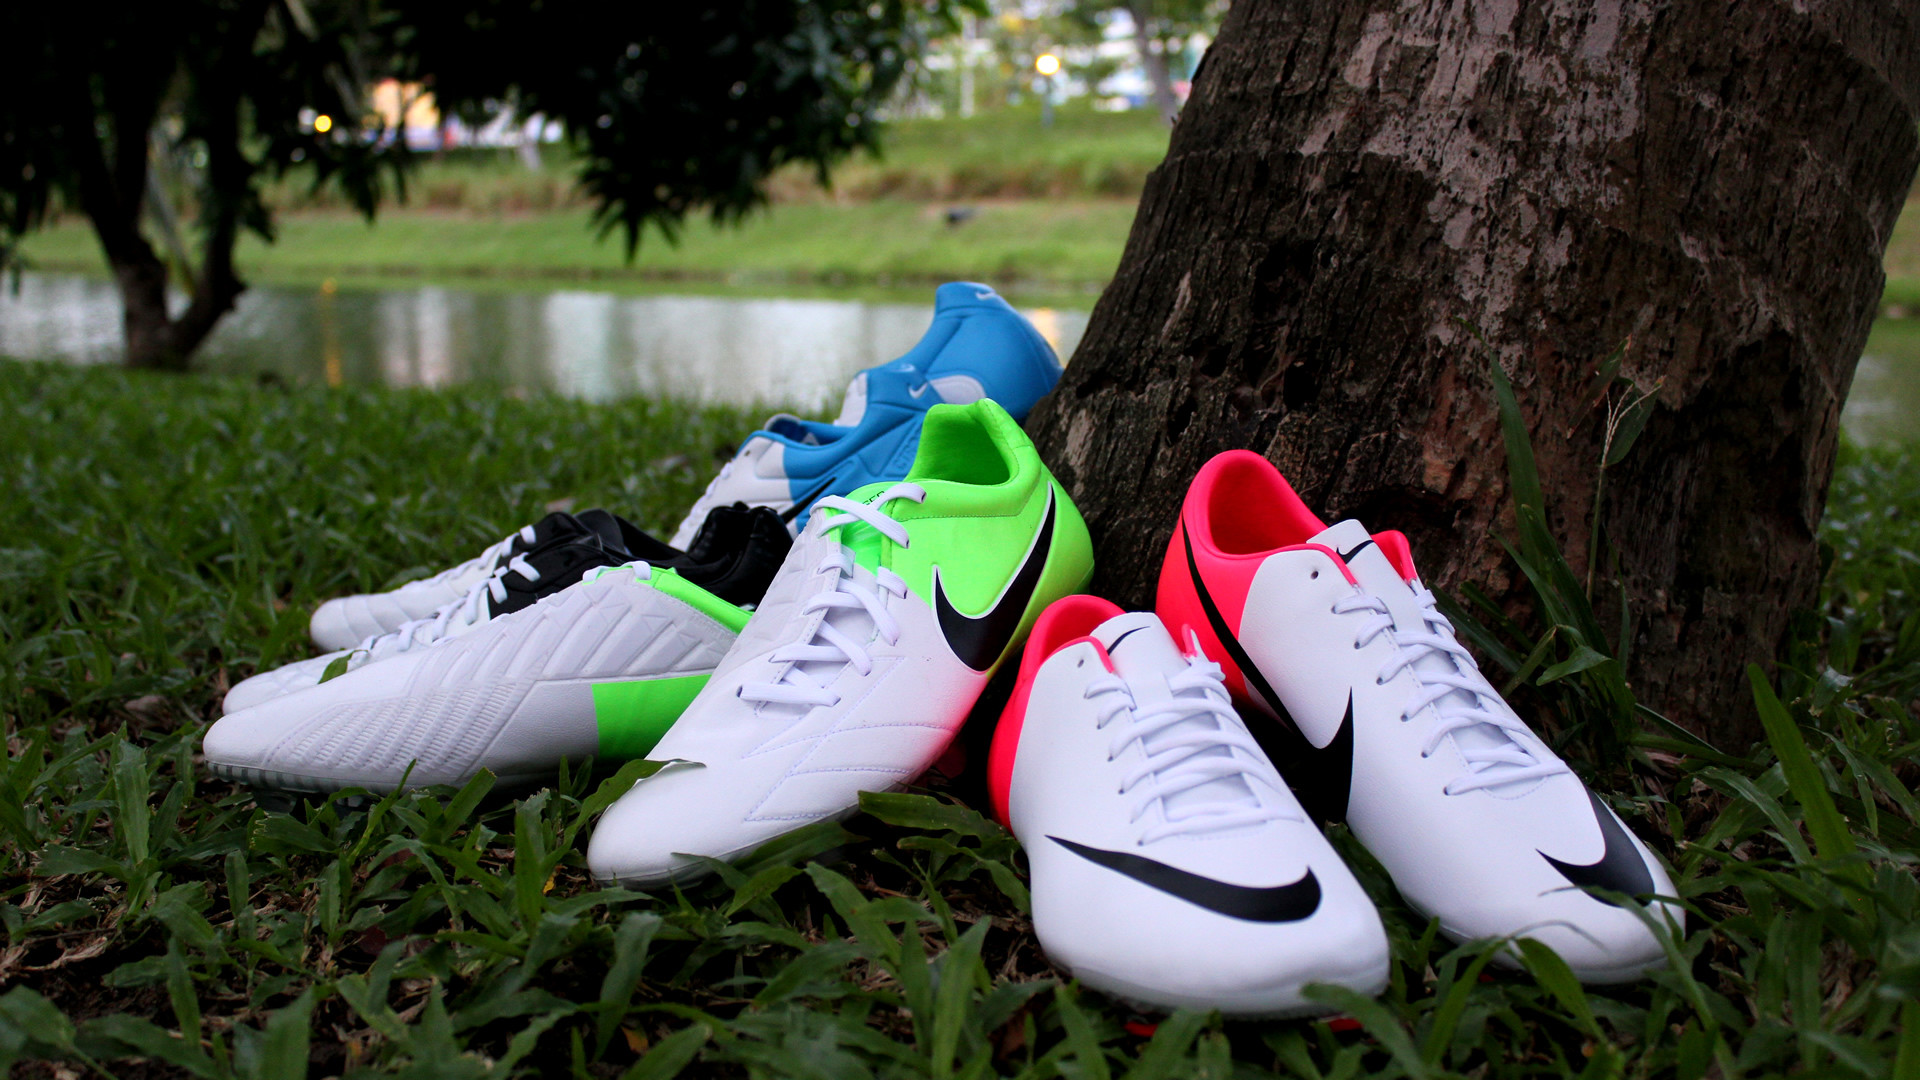 1920x1080 hd wallpaper the clash pin nike collection football